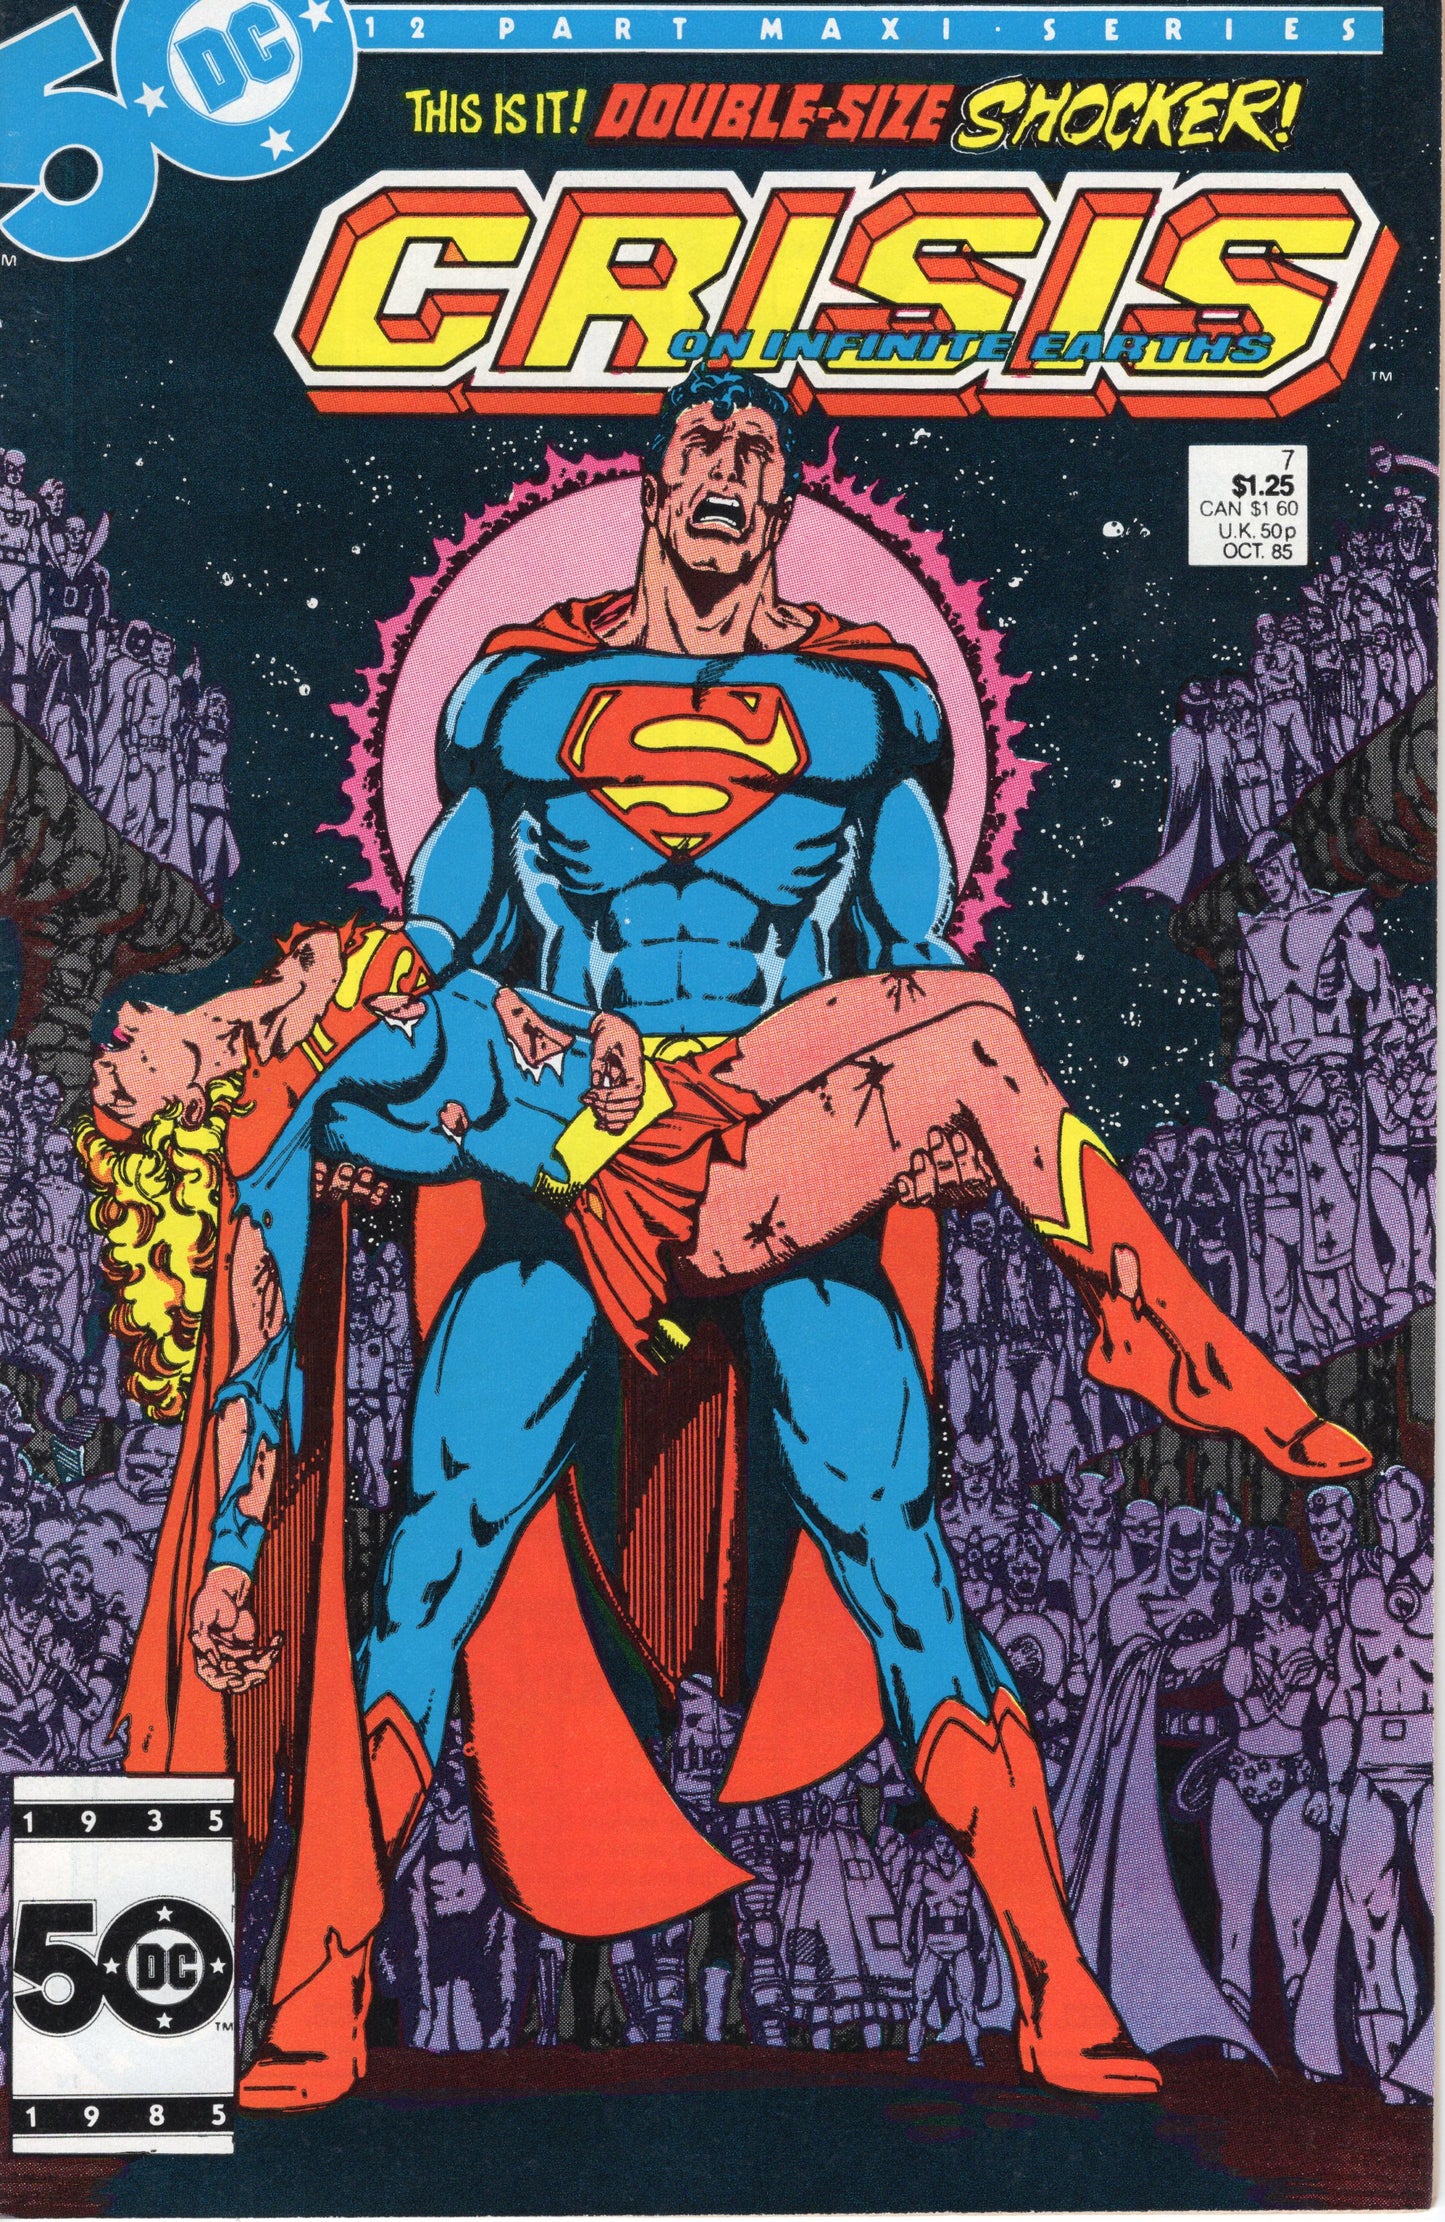 Crisis on Infinite Earths - Issue #7 (April, 1985 - DC Comics) VF-